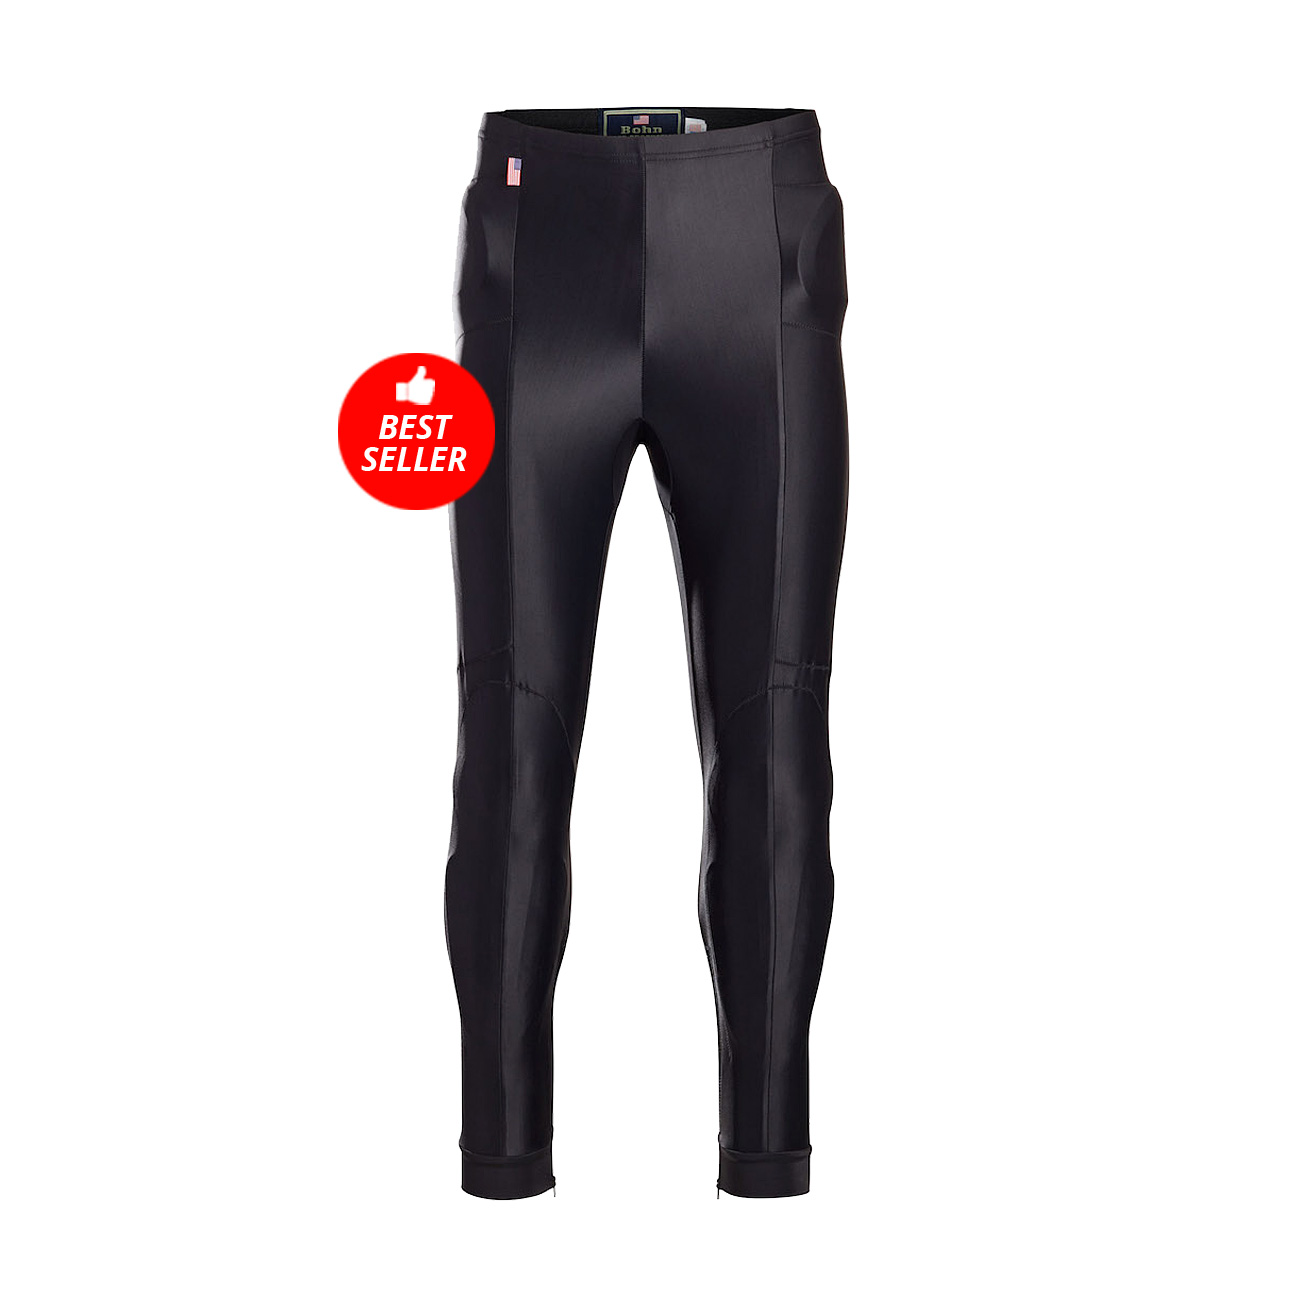 breathable riding pants